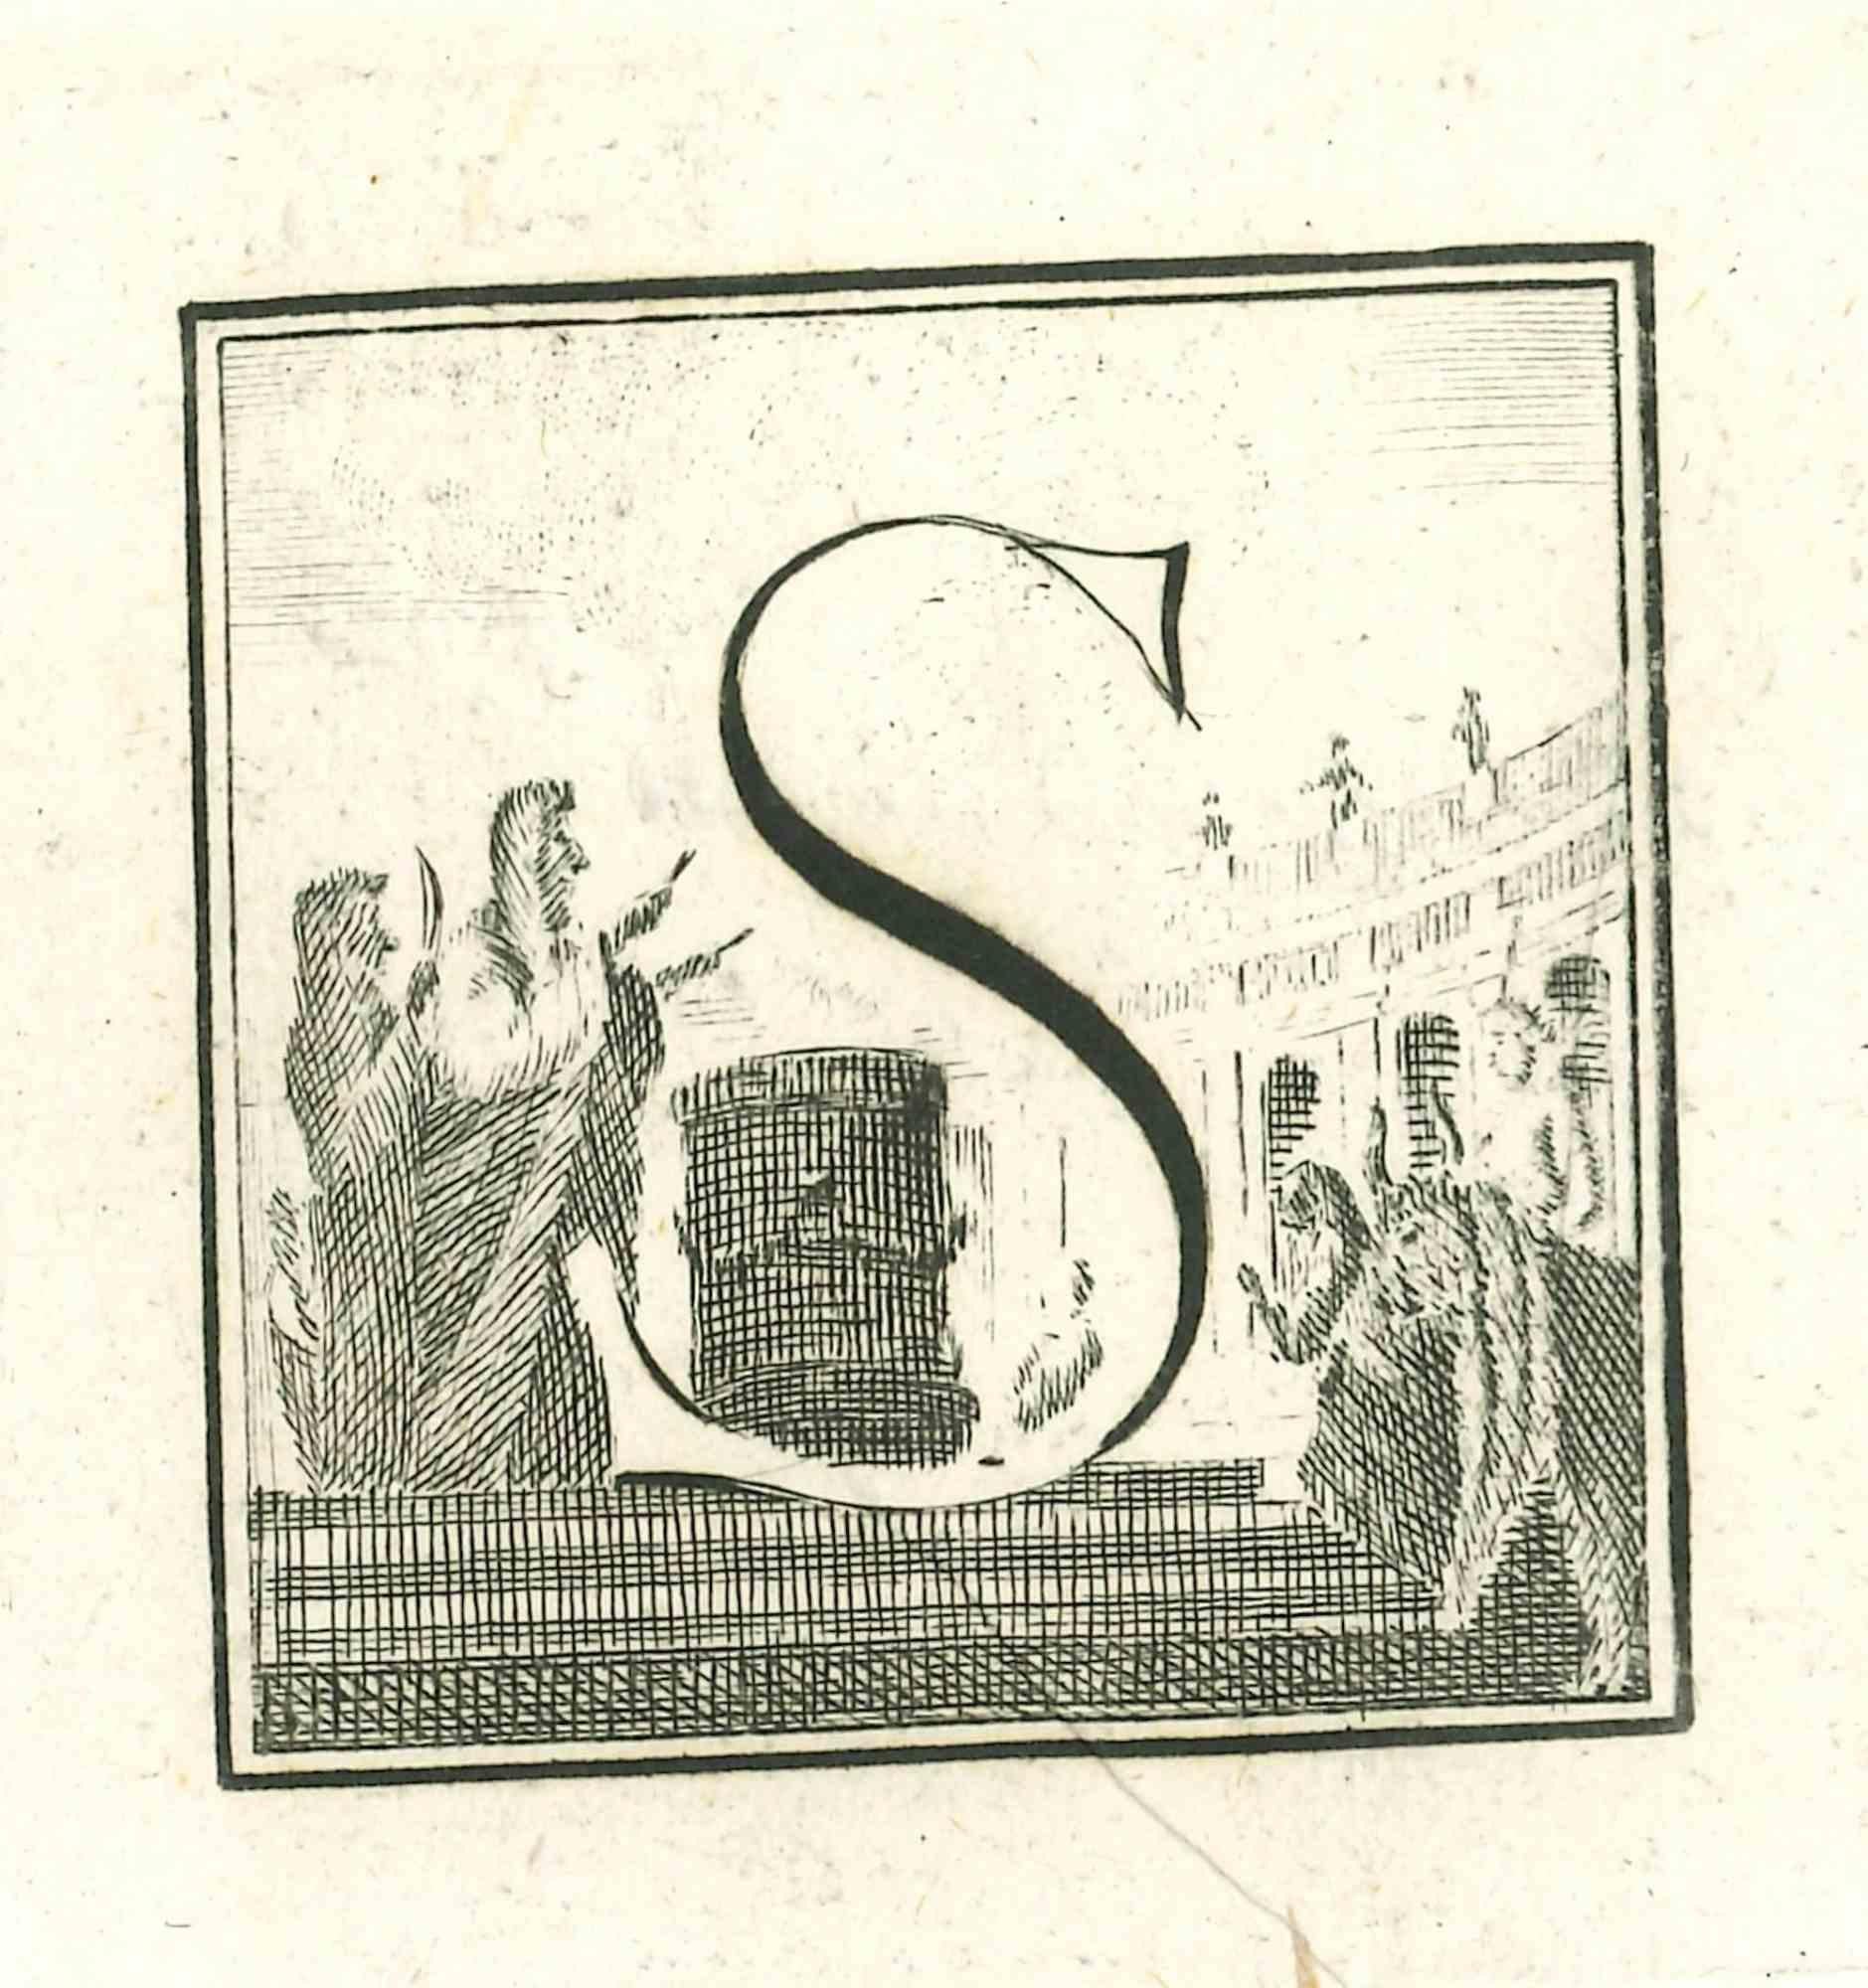 Unknown Figurative Print - Capital Letter S - the Antiquities of Herculaneum Exposed-Etching - 18th Century